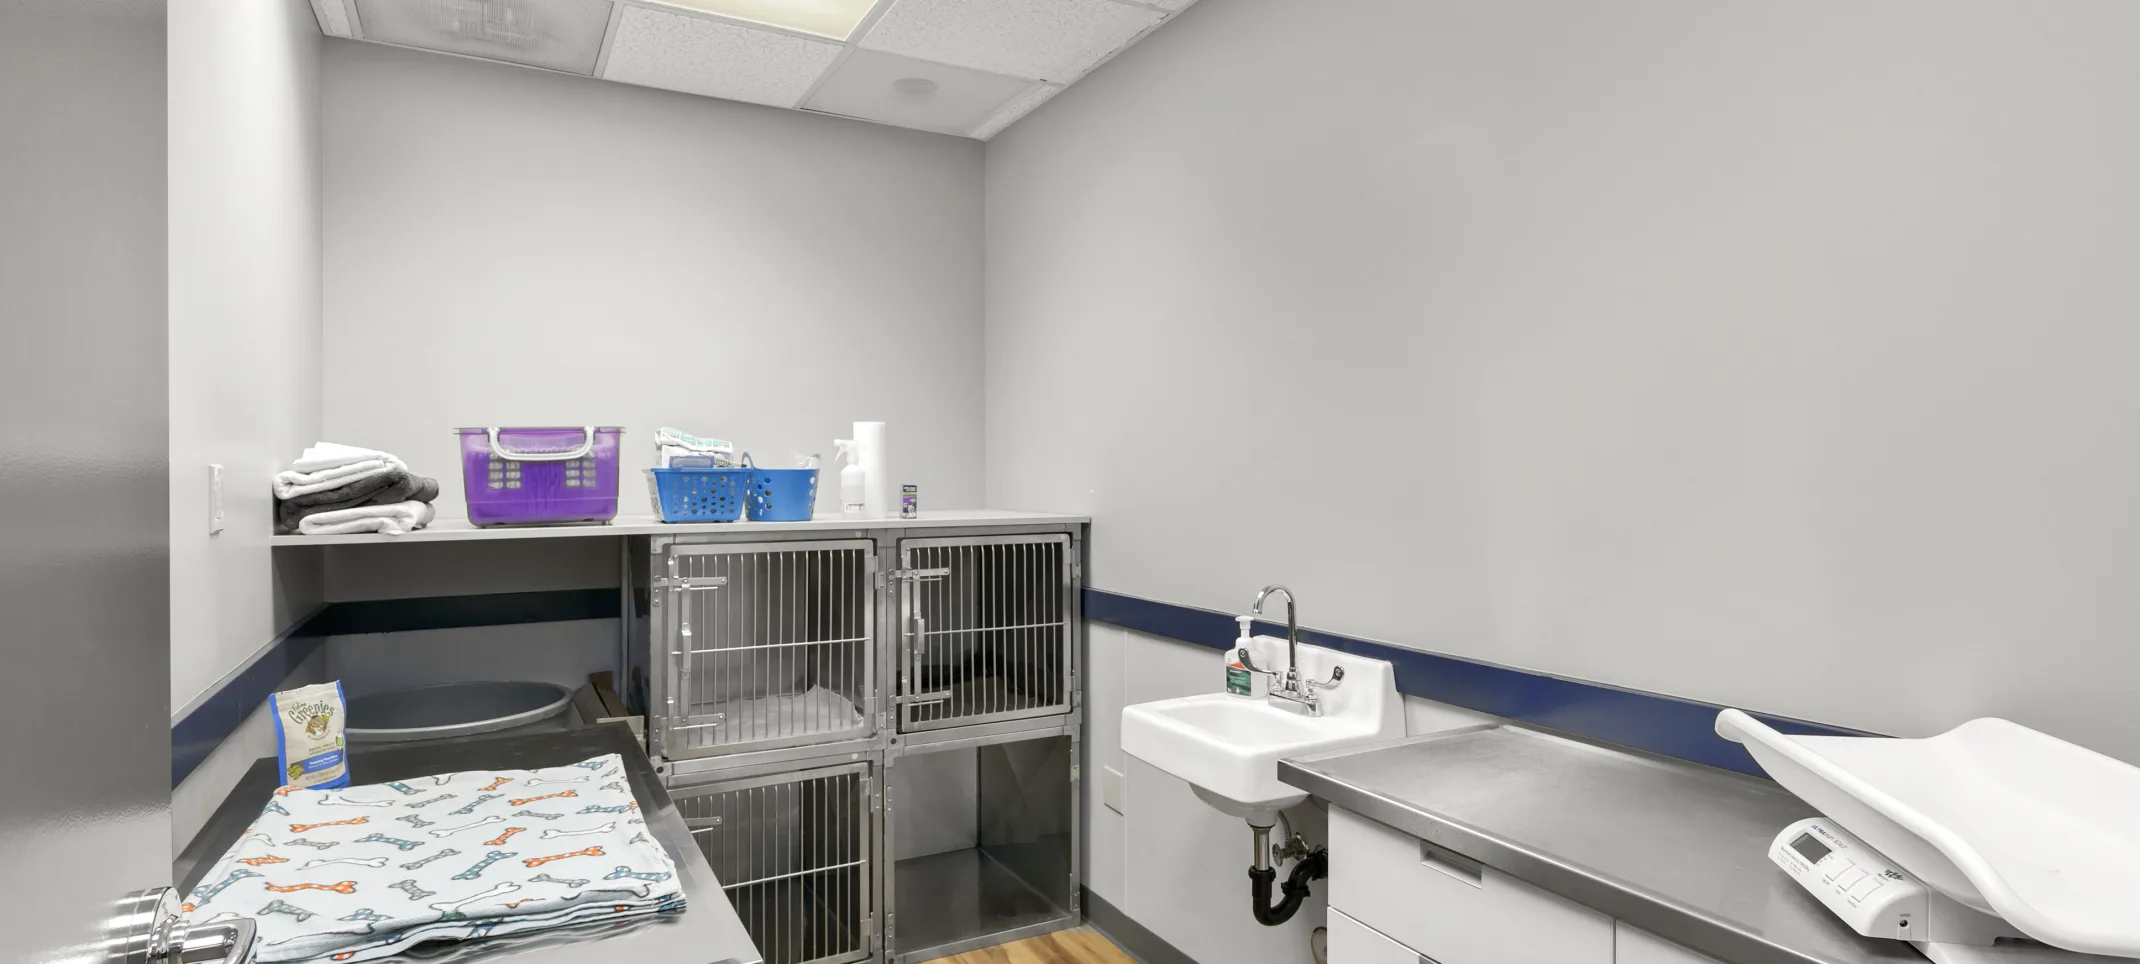 A Back Office with Kennels at Tigard Animal Hospital